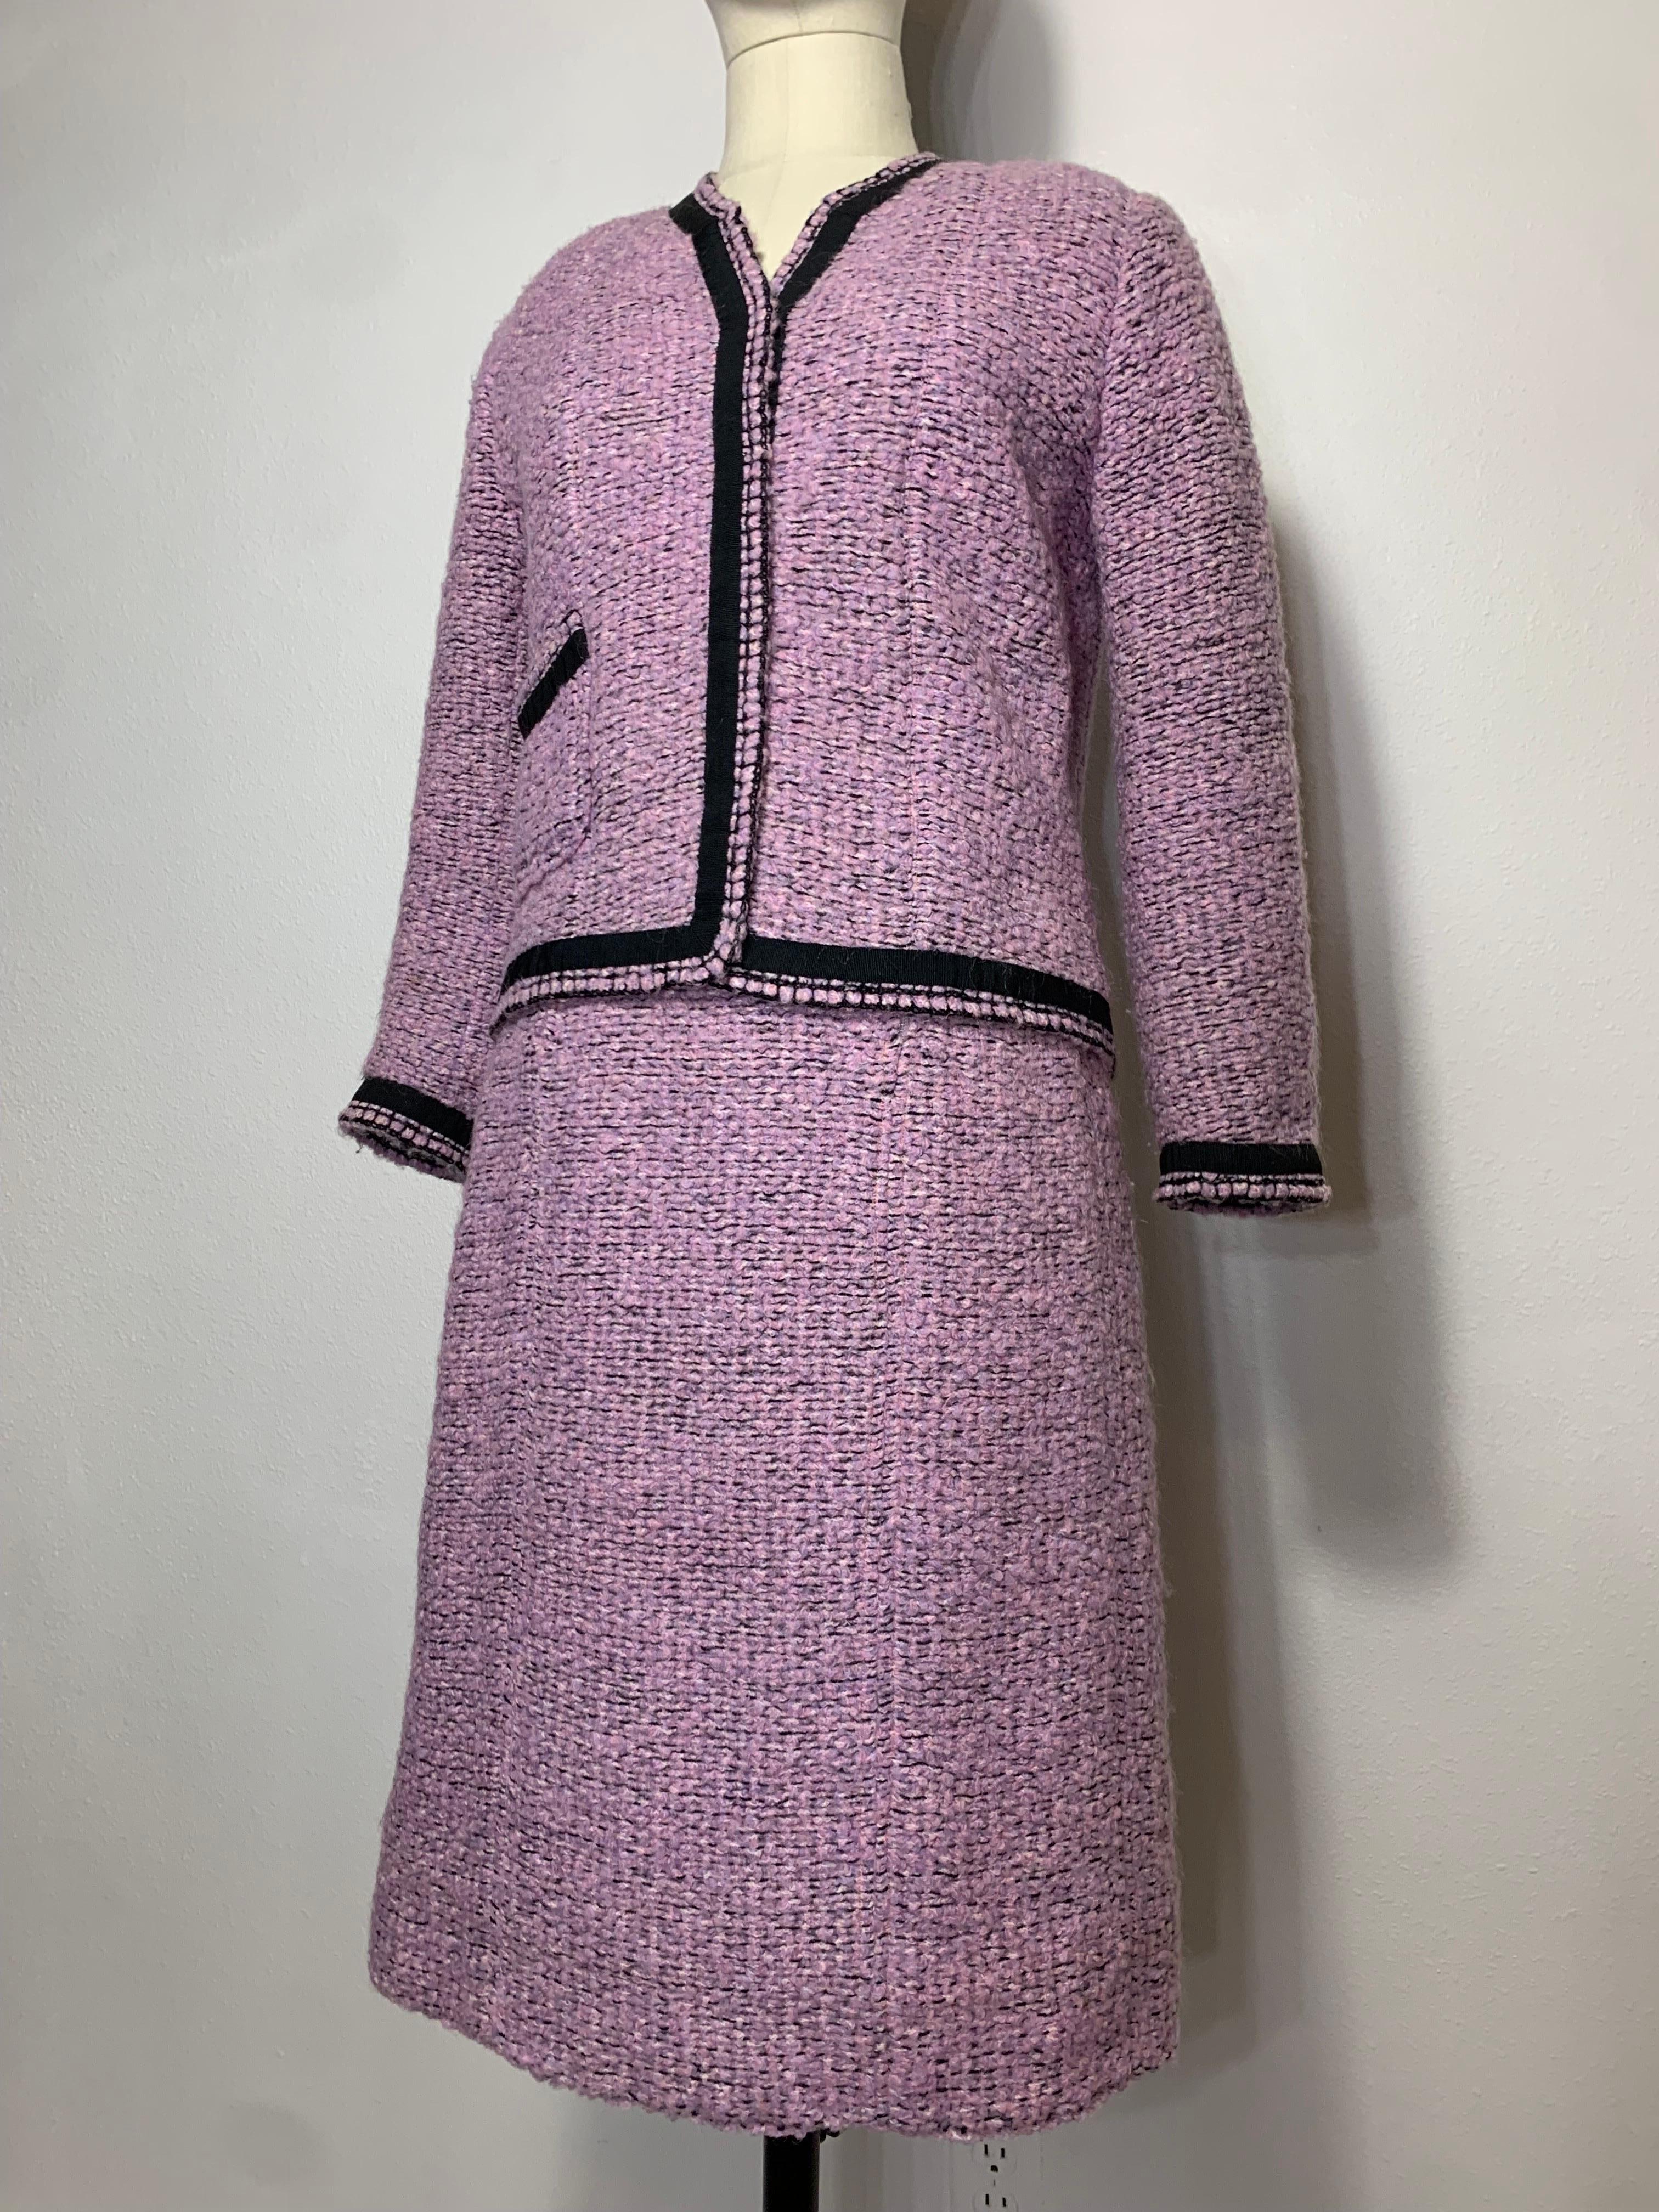 1960 Autumn/Winter Chanel Haute Couture Documented Lavender Tweed Skirt Suit  In Excellent Condition For Sale In Gresham, OR